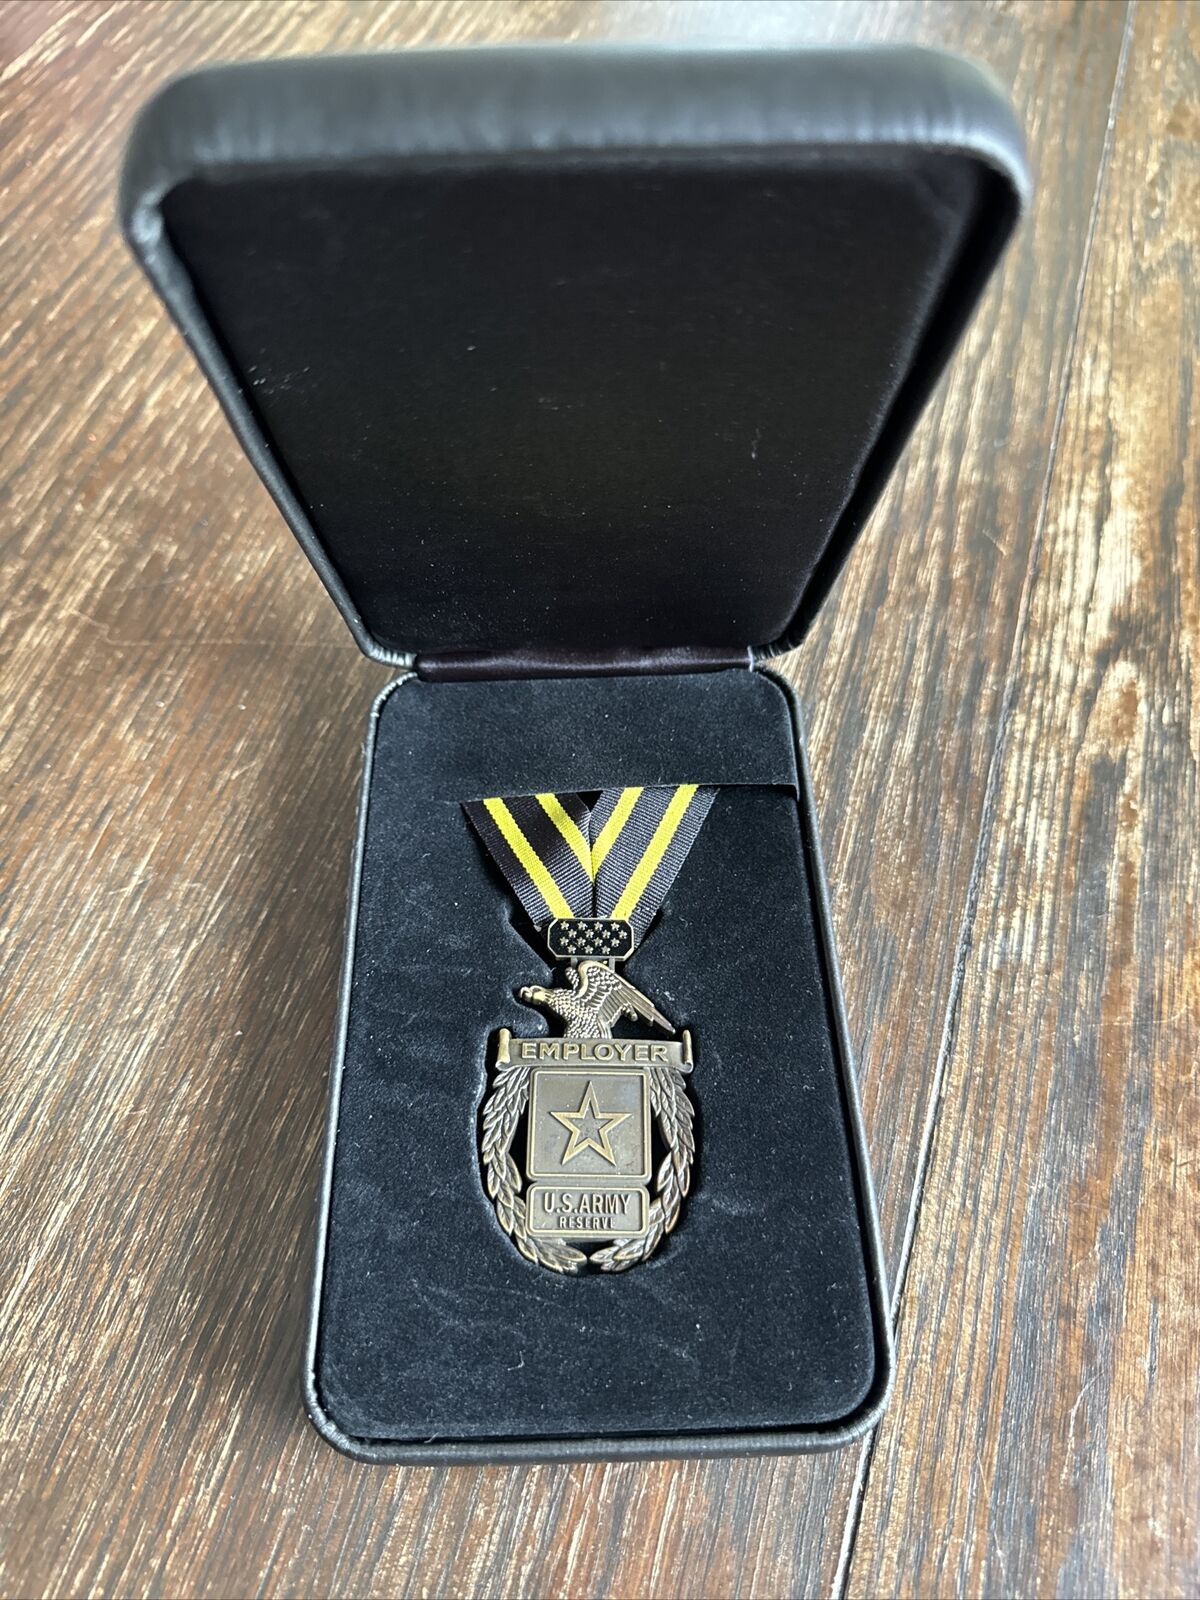 US Army Reserve Employer Ribbon Medal Award Achievement Black & Yellow With Box